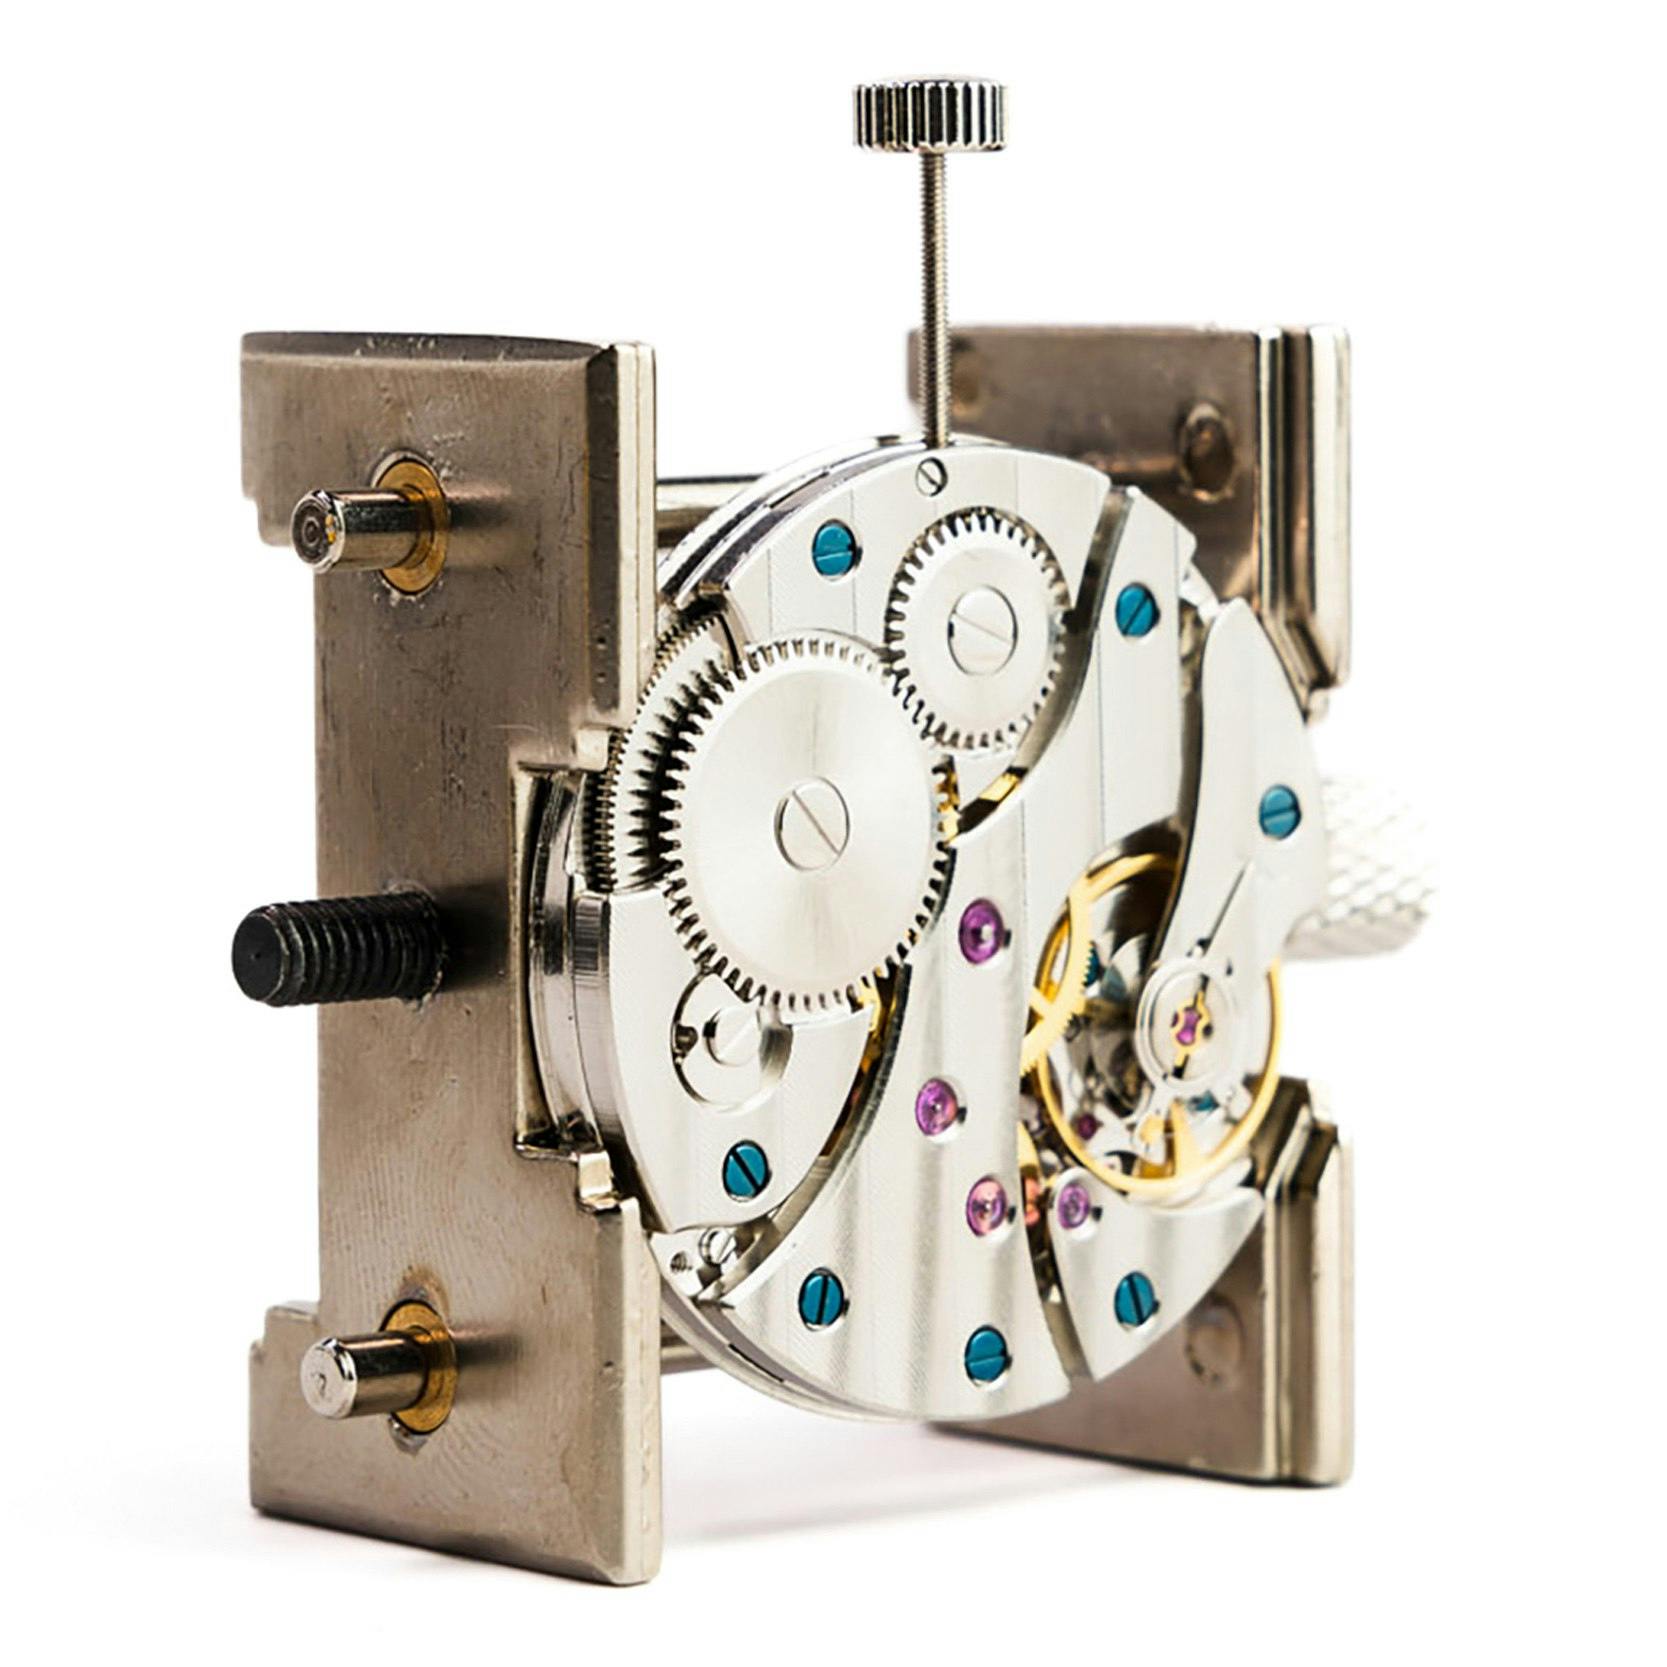 Build Your Own Watch Movement Kit